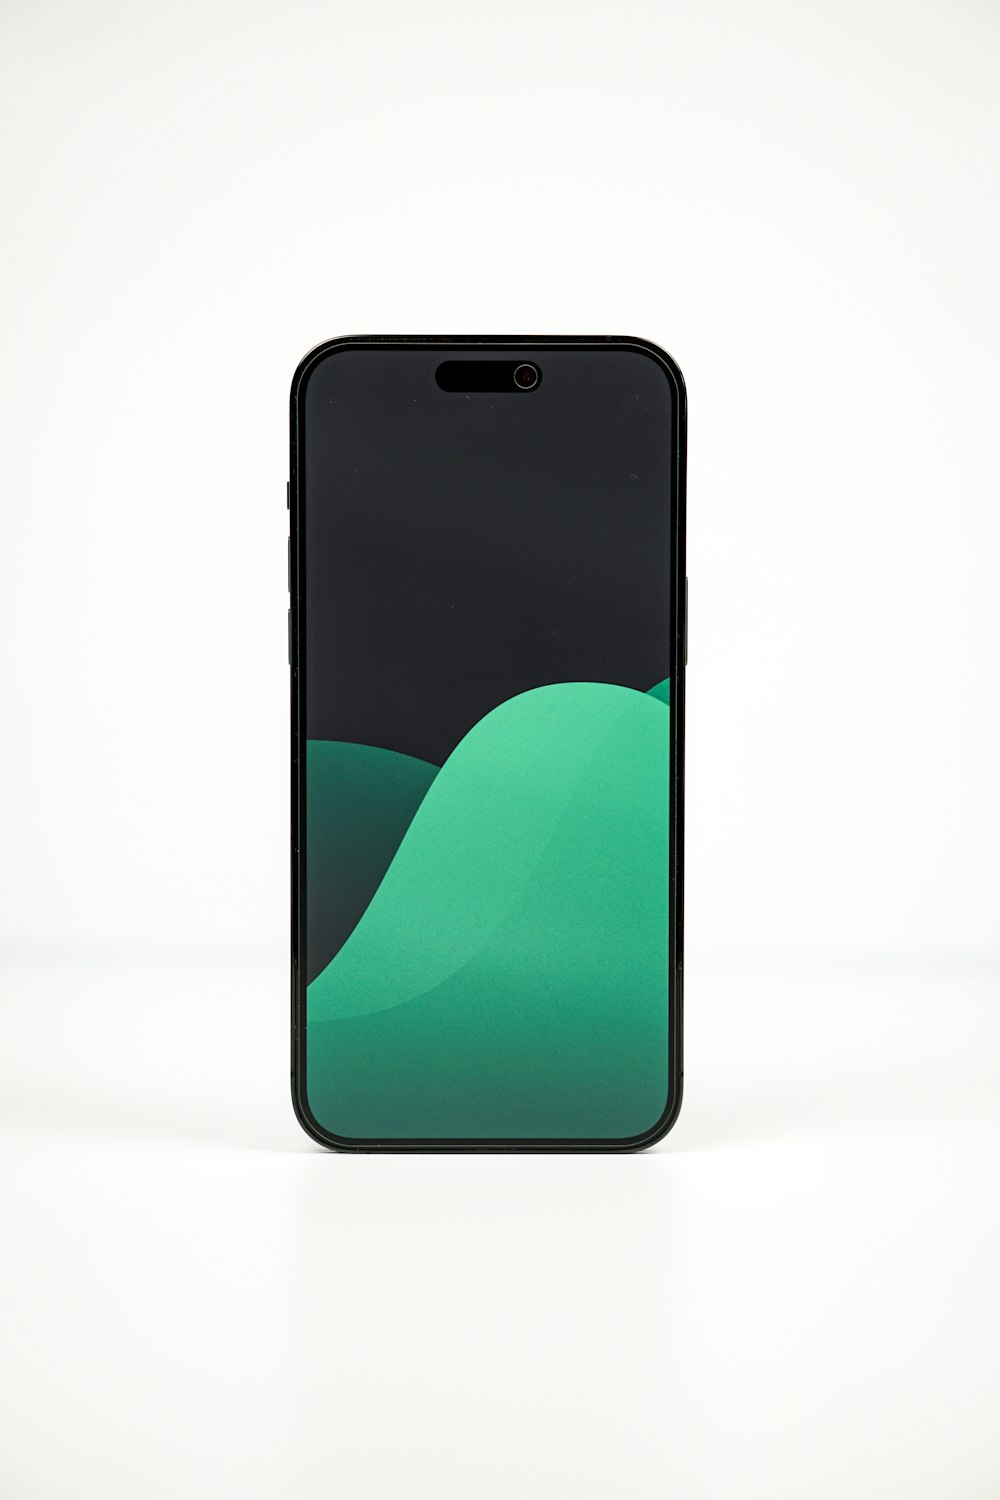 a black and green cell phone on a white surface